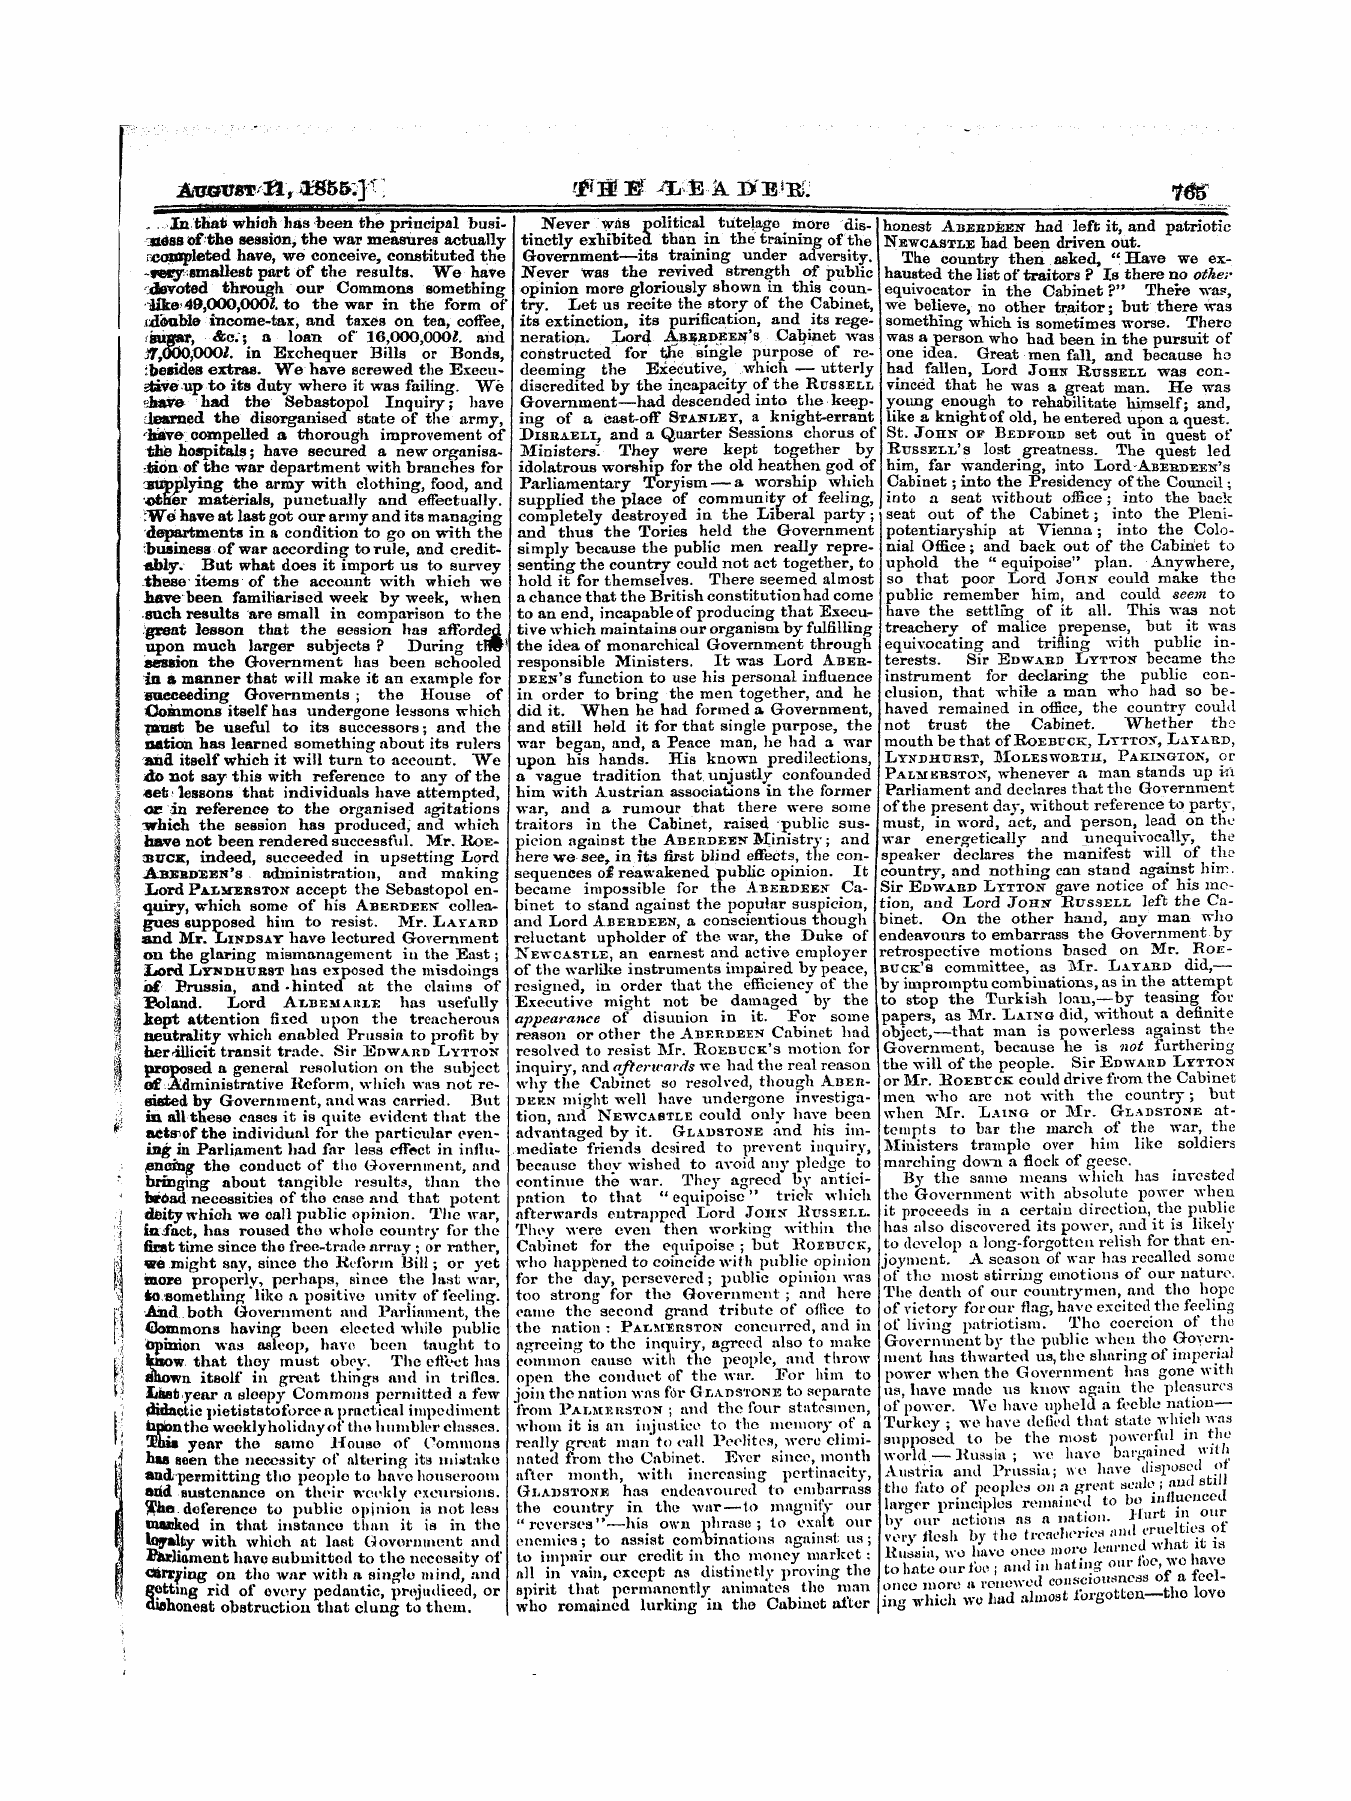 Leader (1850-1860): jS F Y, 1st edition: 9